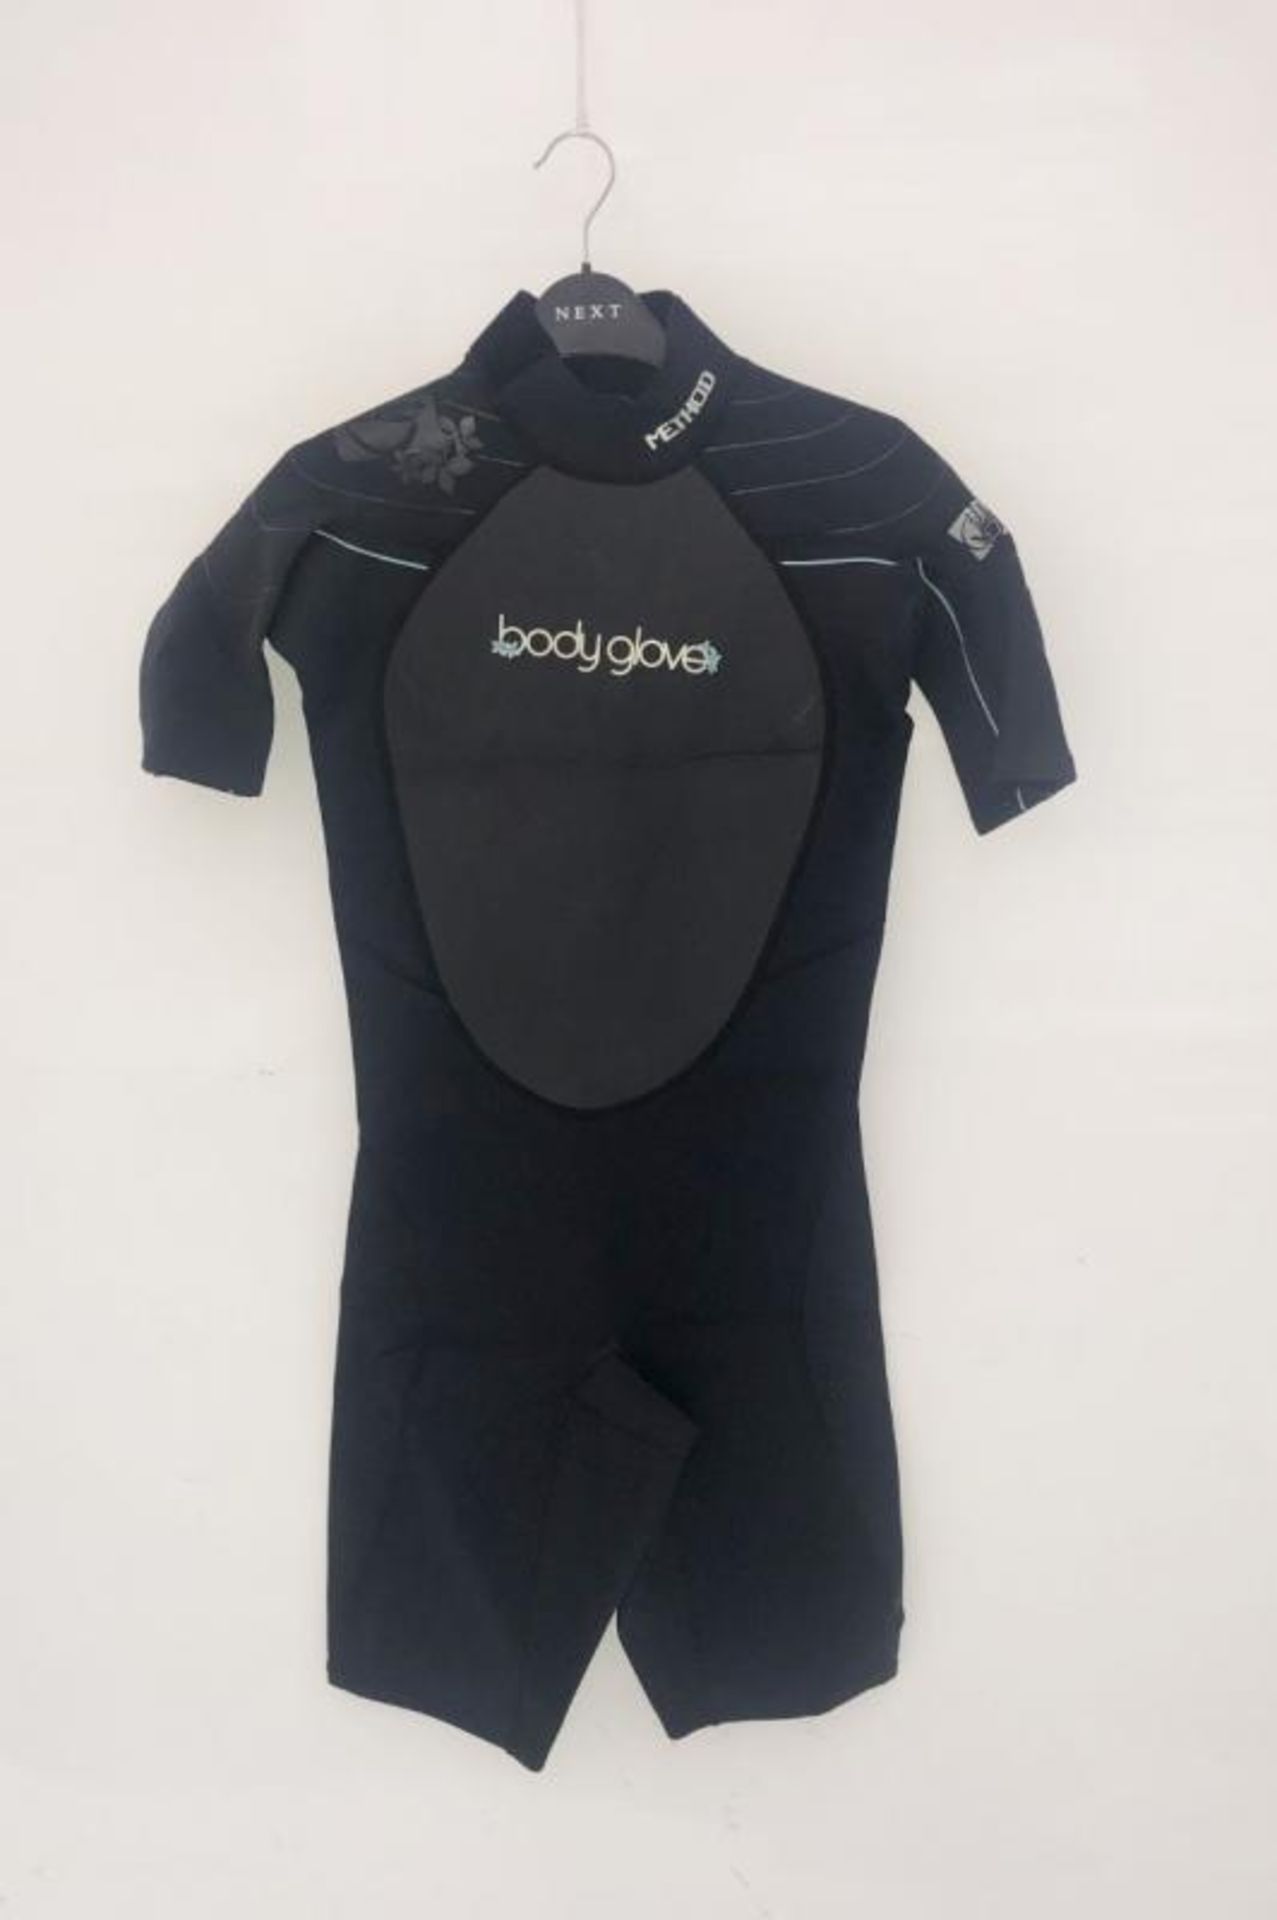 4 x New Body Glove Method Shortie Ladies Wetsuit's - Ref RB136, RB137, RB138, NS485 - CL349 - Altri - Image 15 of 18